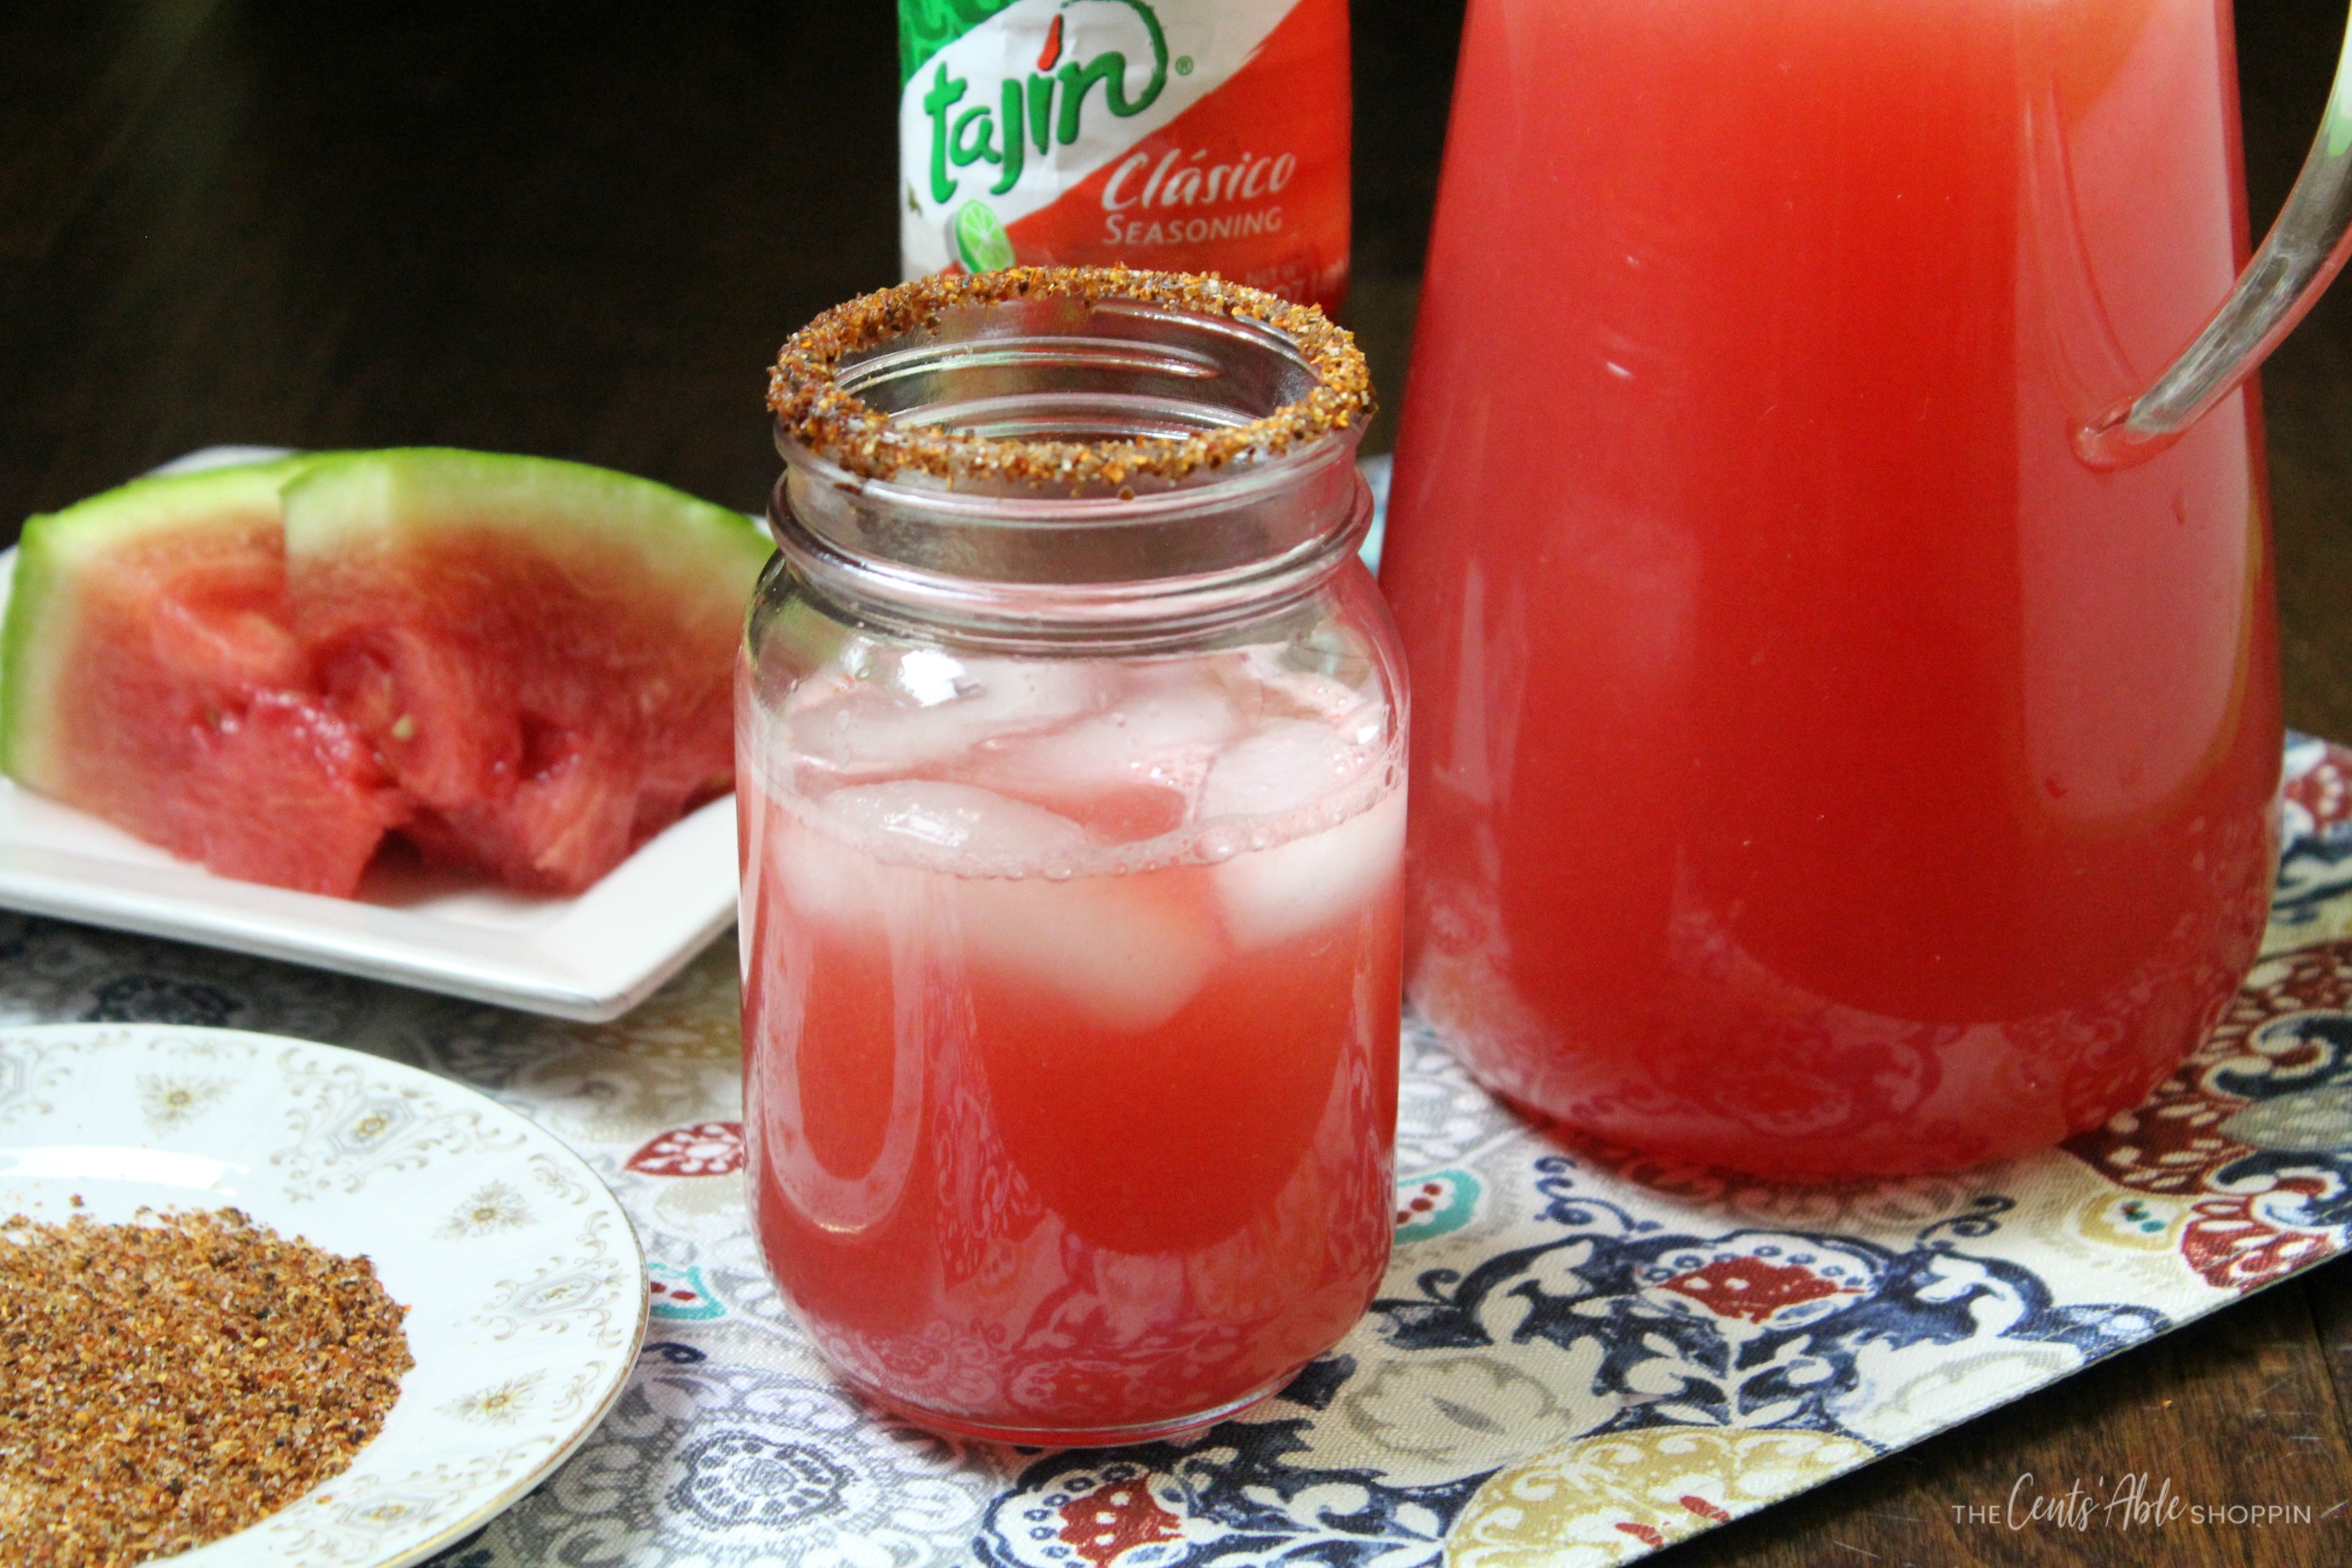 This watermelon agua fresca (also known as Agua de Sandia) is a refreshing summer beverage that's ready in minutes with just 3 simple ingredients!